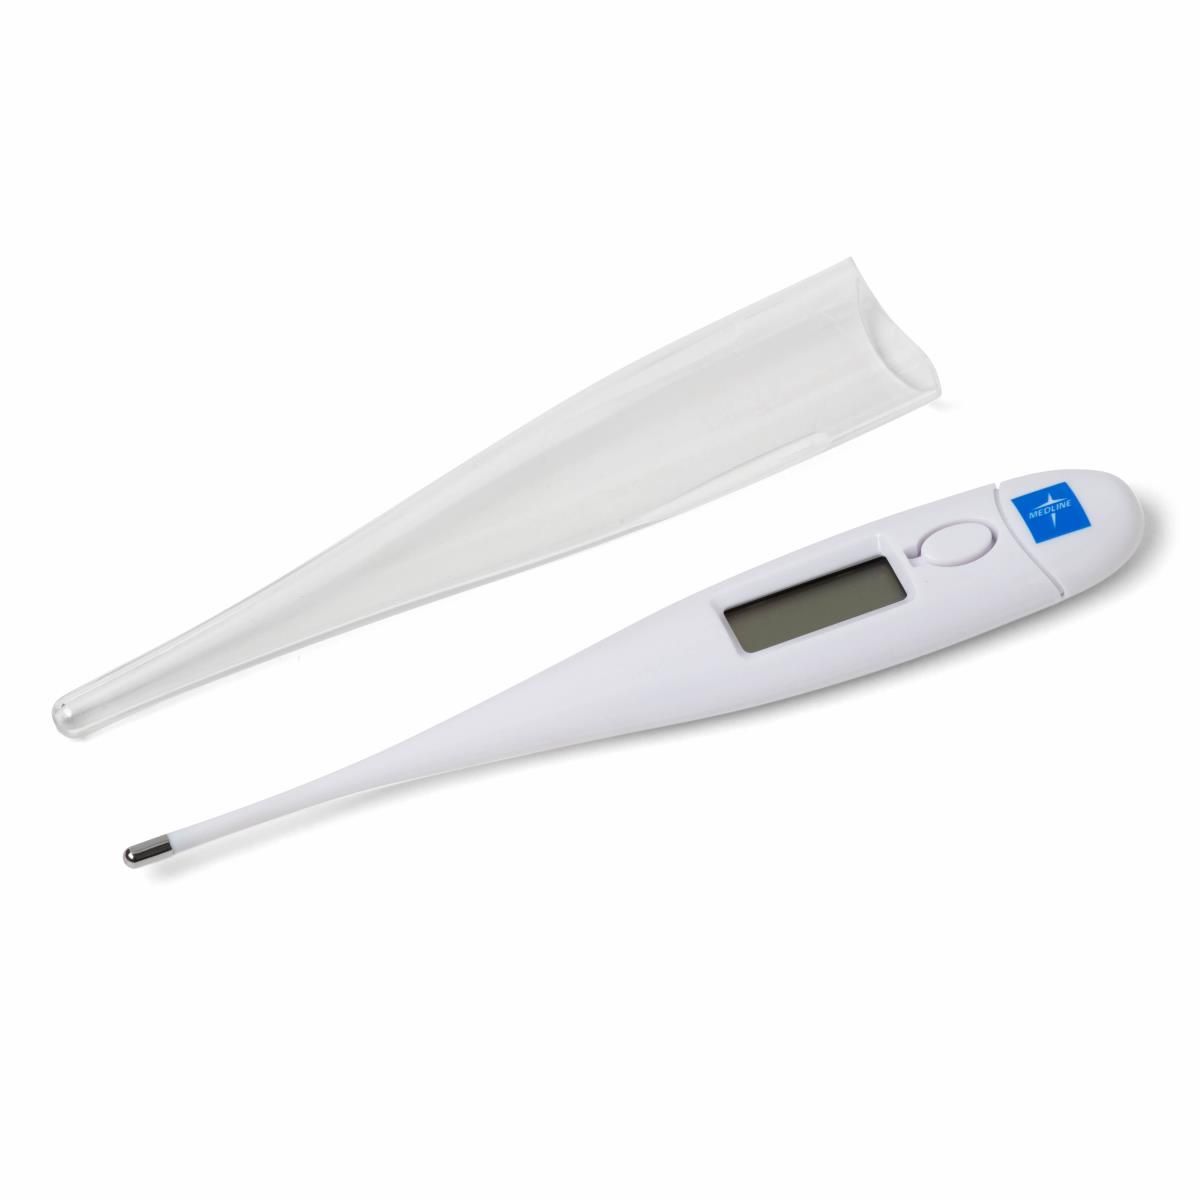 30-Second Oral Digital Stick Thermometer with Fahrenheit / Celsius